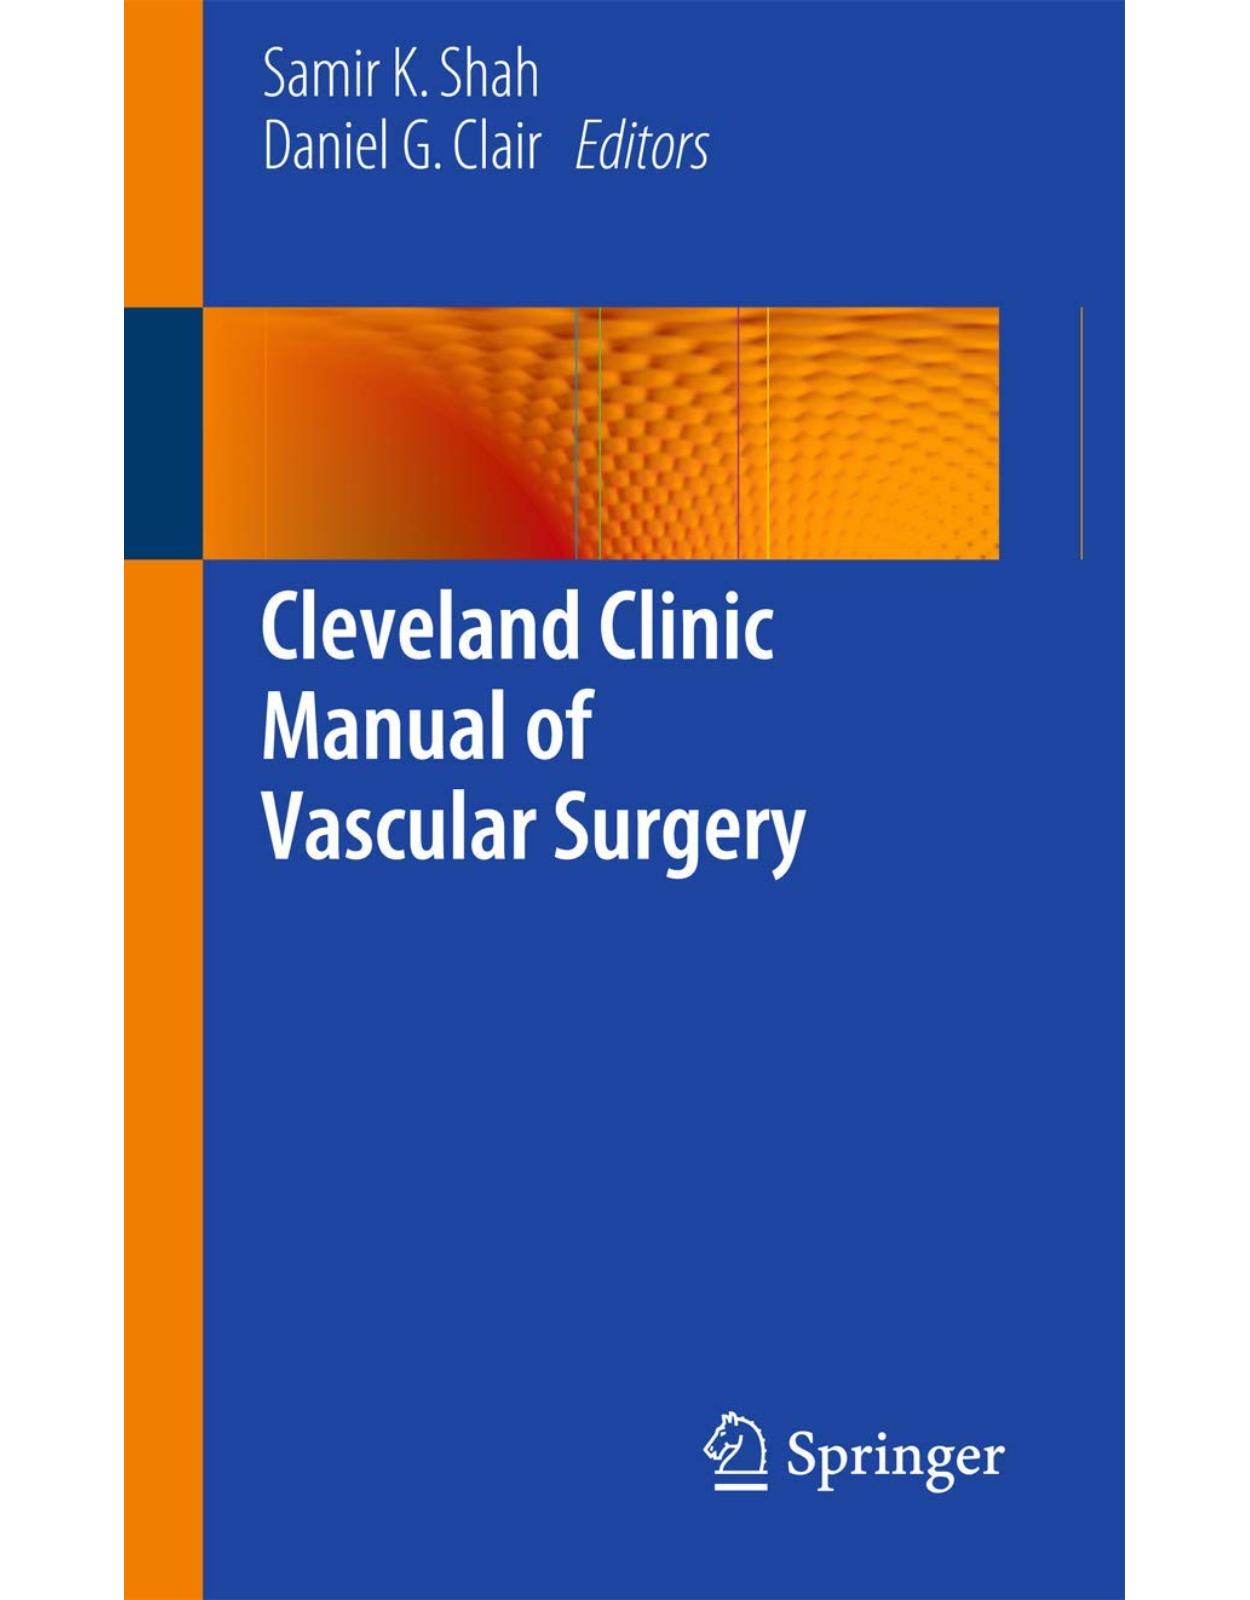 Cleveland Clinic Manual of Vascular Surgery 